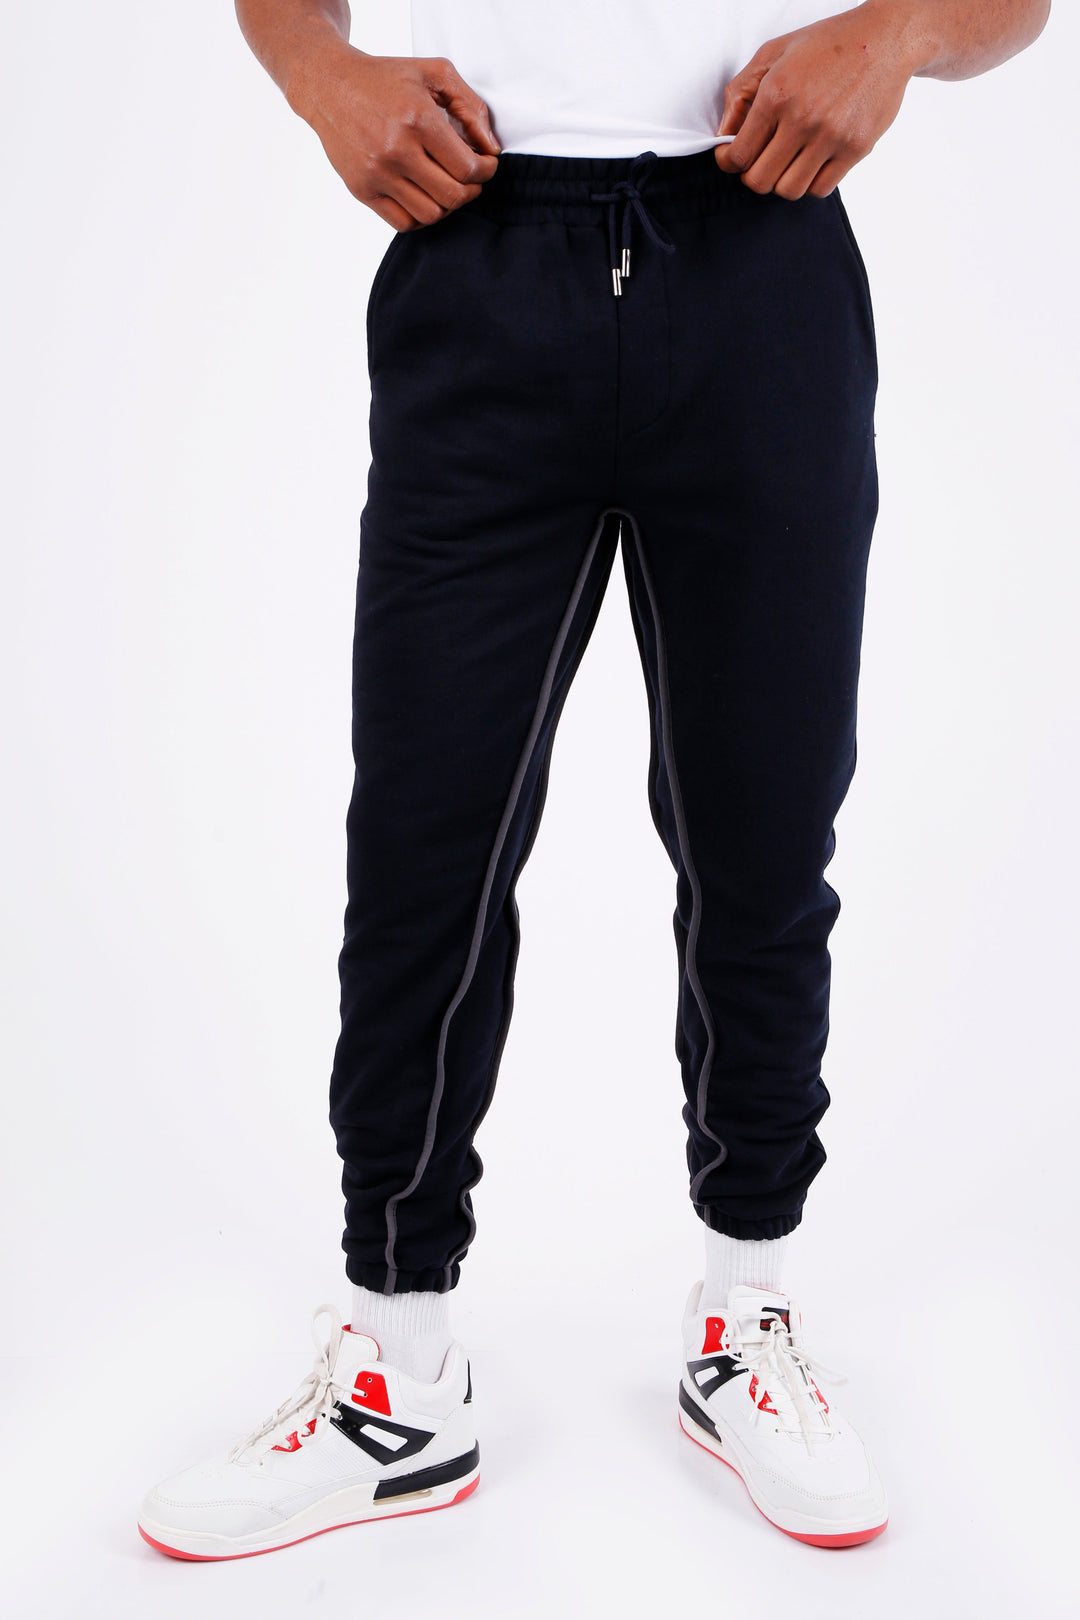 Men's tracksuit with stripes, elastic cuff